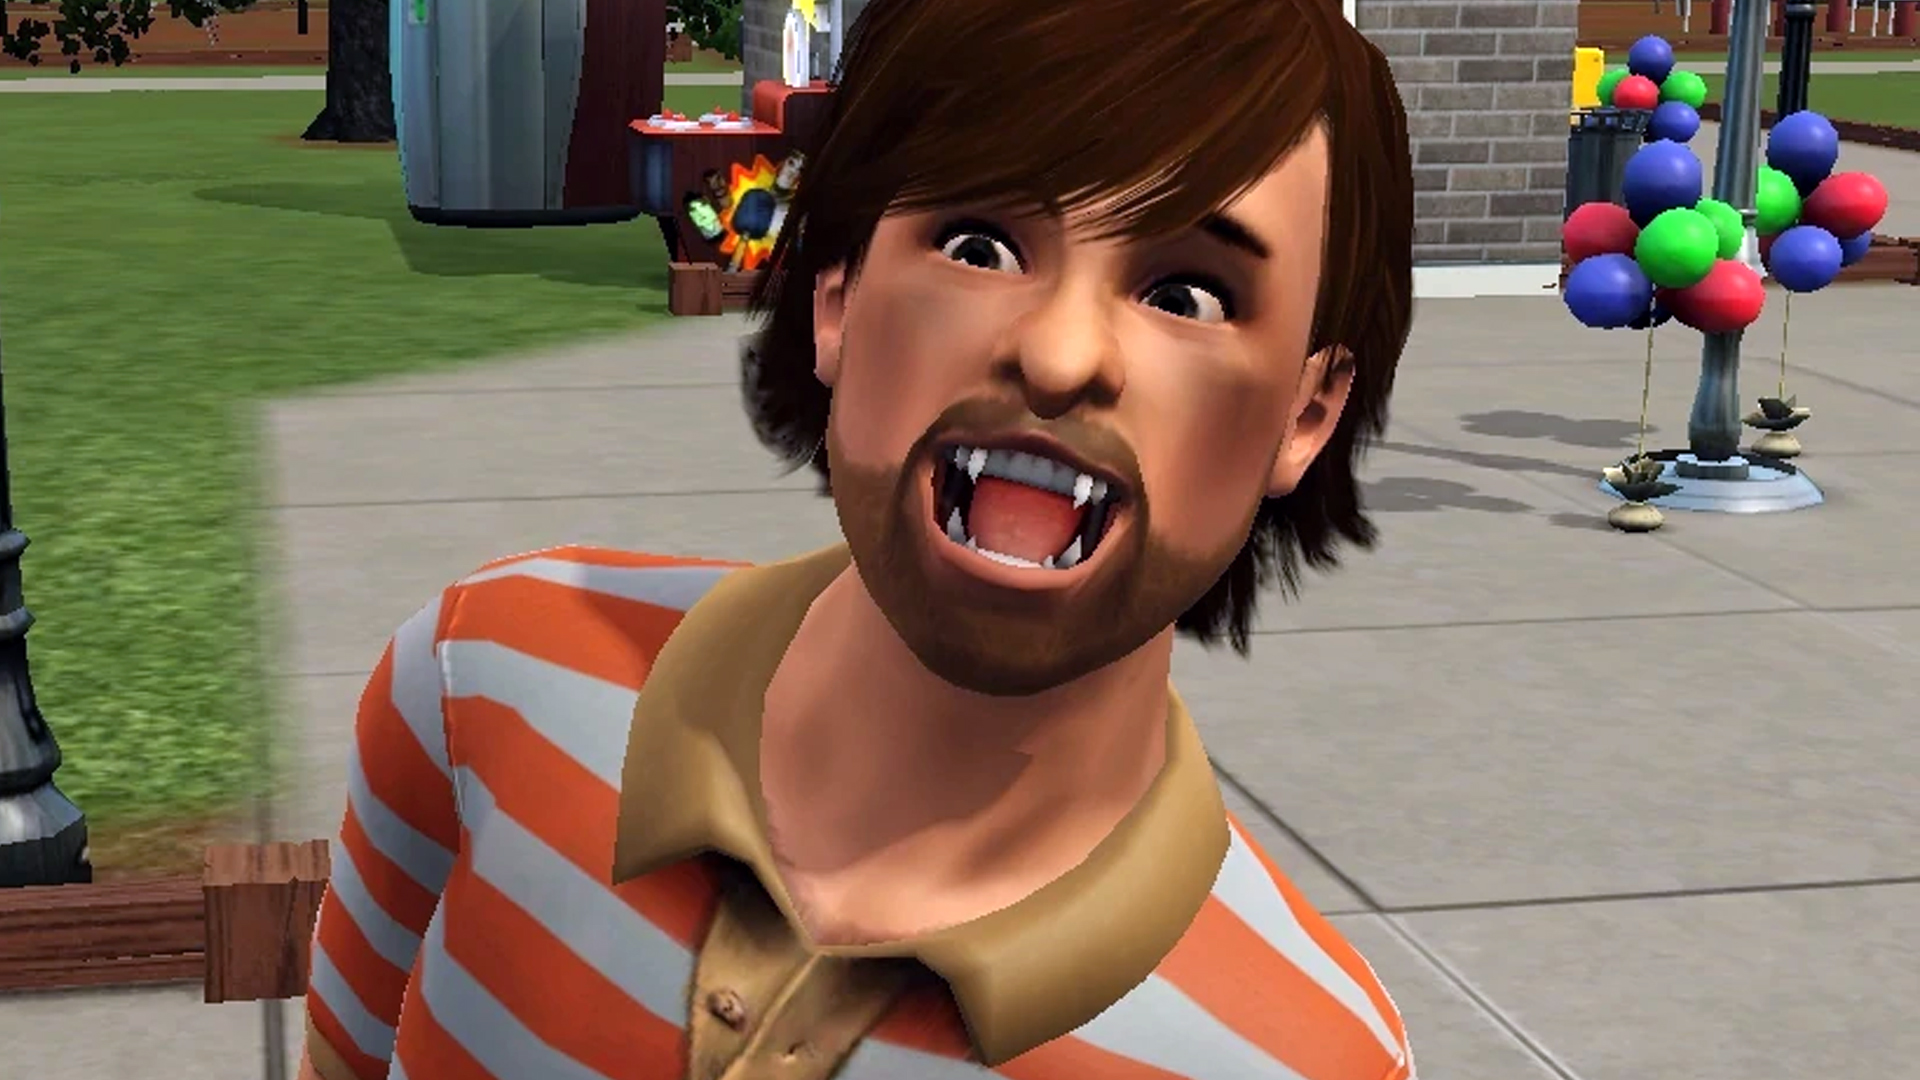 Next The Sims 4 update could add werewolves and pronouns